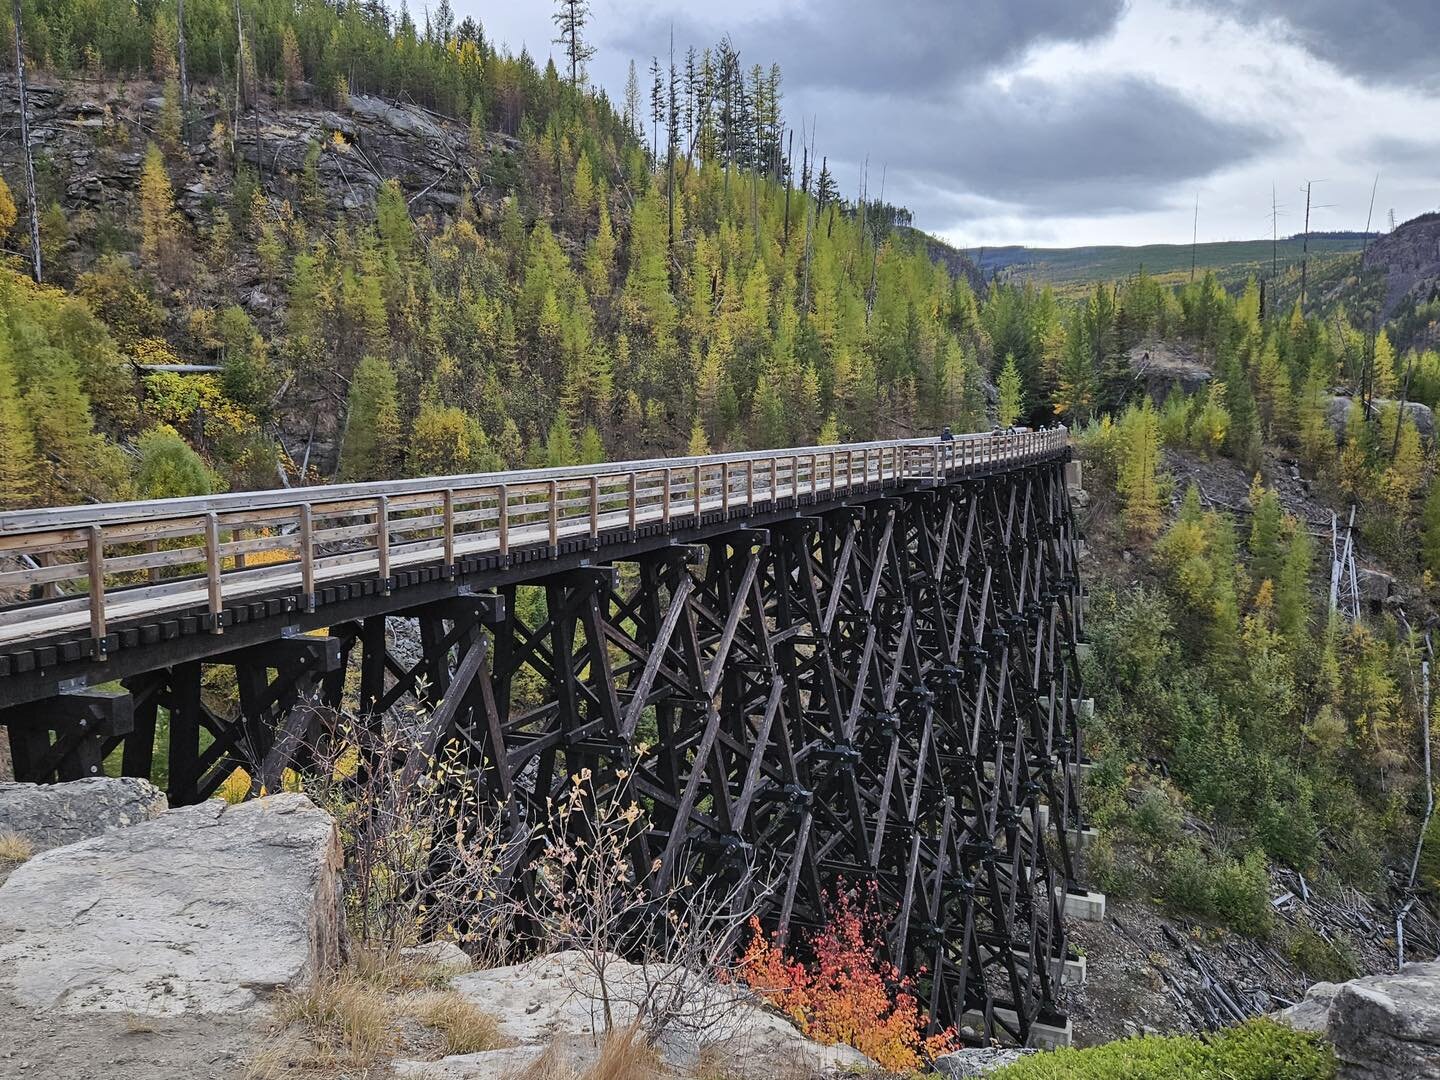 New for 2024 Tiki Time Tours is offering bike tours of Myra Canyon and the Kettle Valley Rail Trail. Enjoy bikes rentals, shuttle service and a guided tour of a portion of the 24km circuit, including plenty of stops for photos 📸 

Get an early start